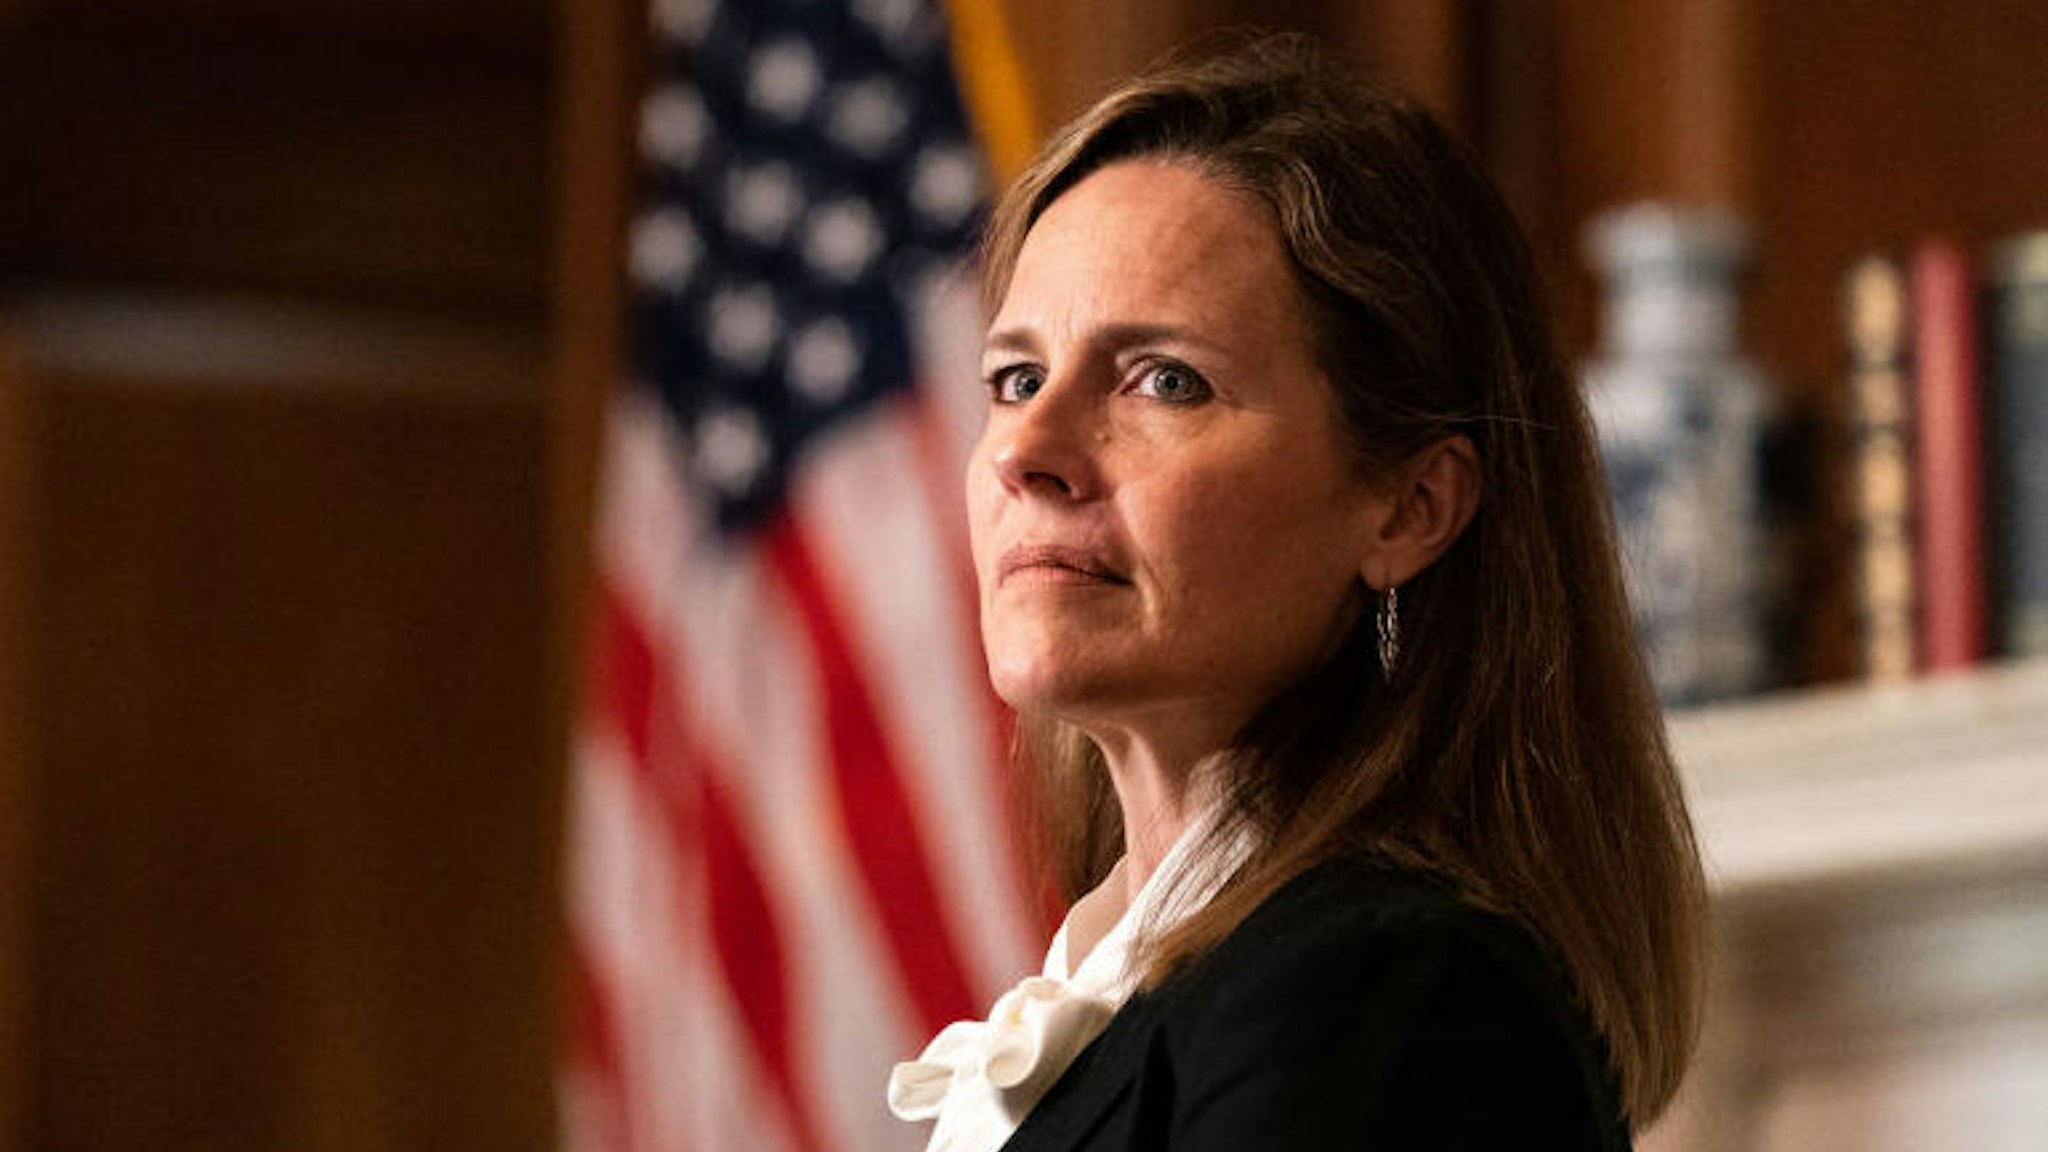 Amy Coney Barrett, U.S. President Donald Trump's nominee for associate justice of the U.S. Supreme Court, meets with Senator Jerry Moran, a Republican from Kansas, not pictured, at the U.S. Capitol in Washington, D.C., U.S., on Thursday, Oct. 1, 2020. A bruising Senate confirmation fight over Trump's Supreme Court choice may seal the fates of several incumbent senators in the November election, though it has yet to drastically alter the odds for which party will control the chamber. Photographer: Anna Moneymaker/The New York Times/Bloomberg